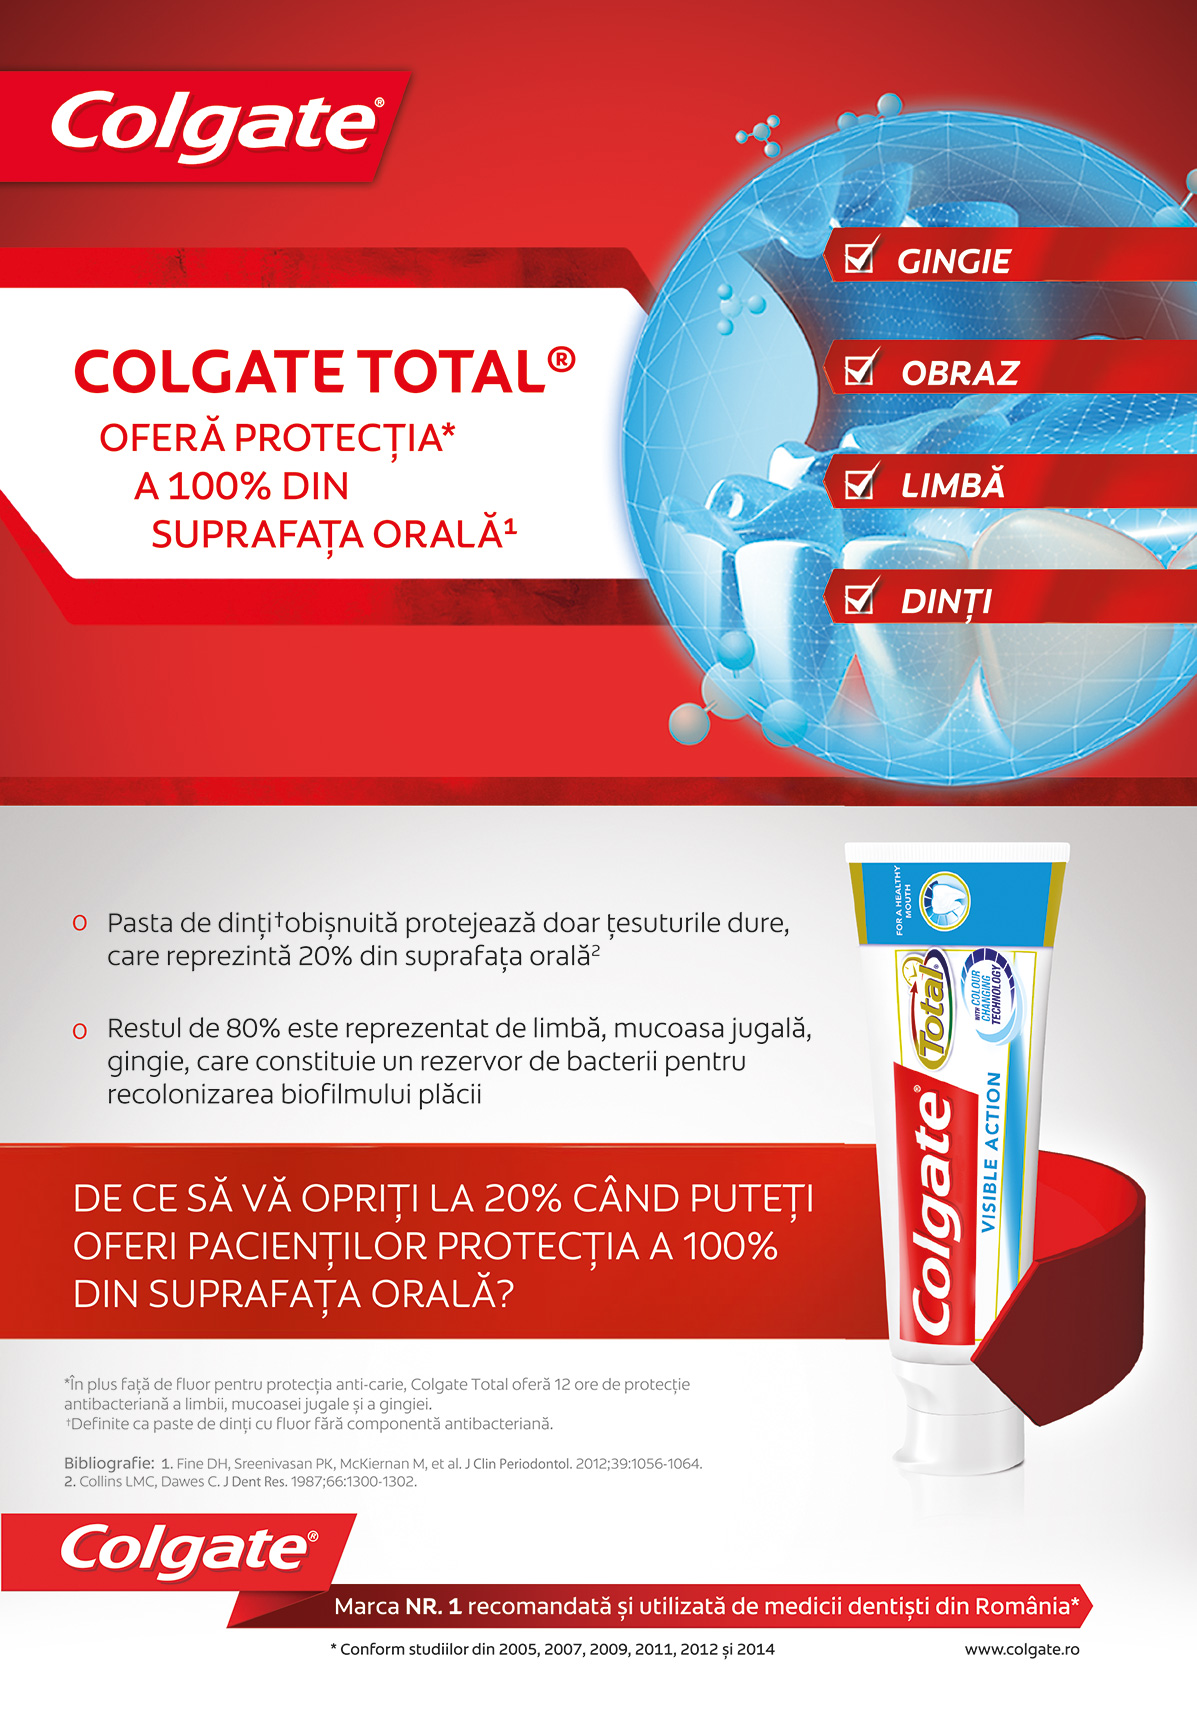 Colgate Total – Visible Action